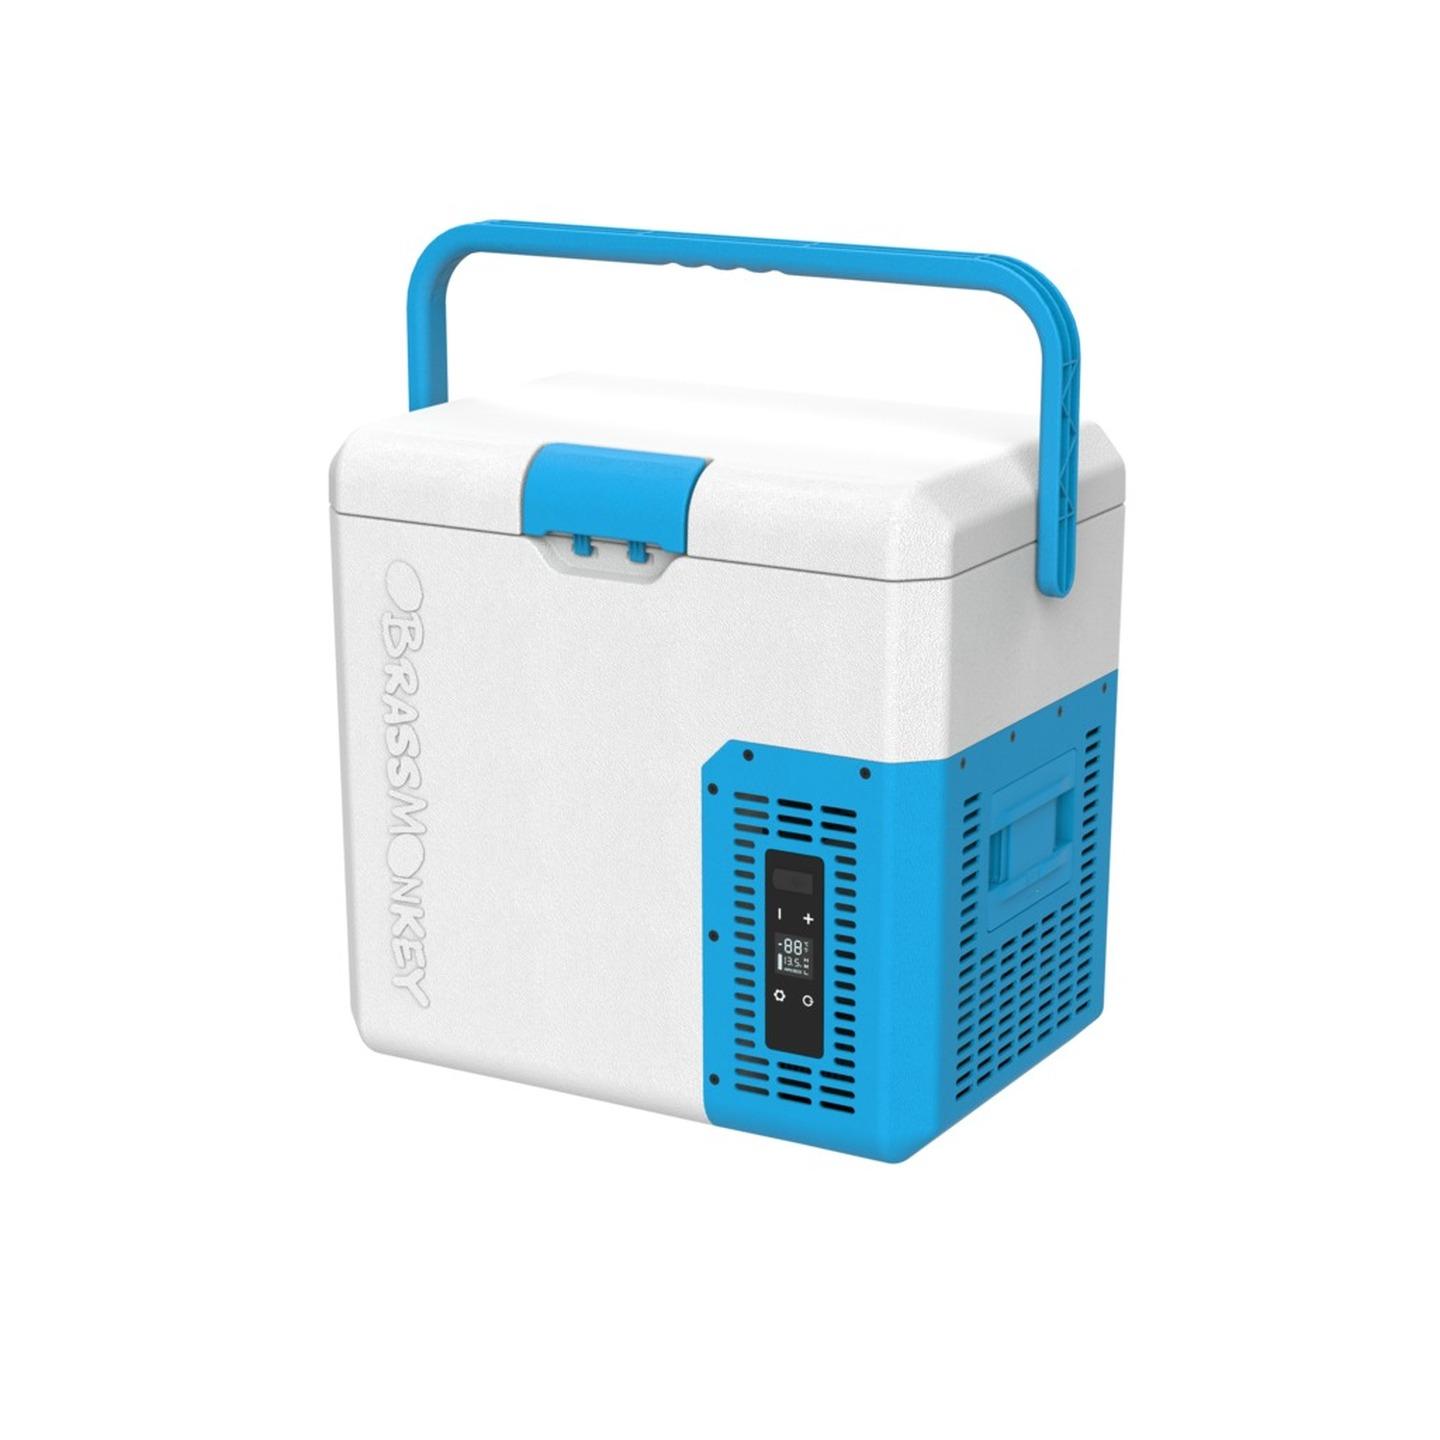 18L Brass Monkey Portable Fridge/Freezer with Carry Handle and Battery Compartment - Blue/White